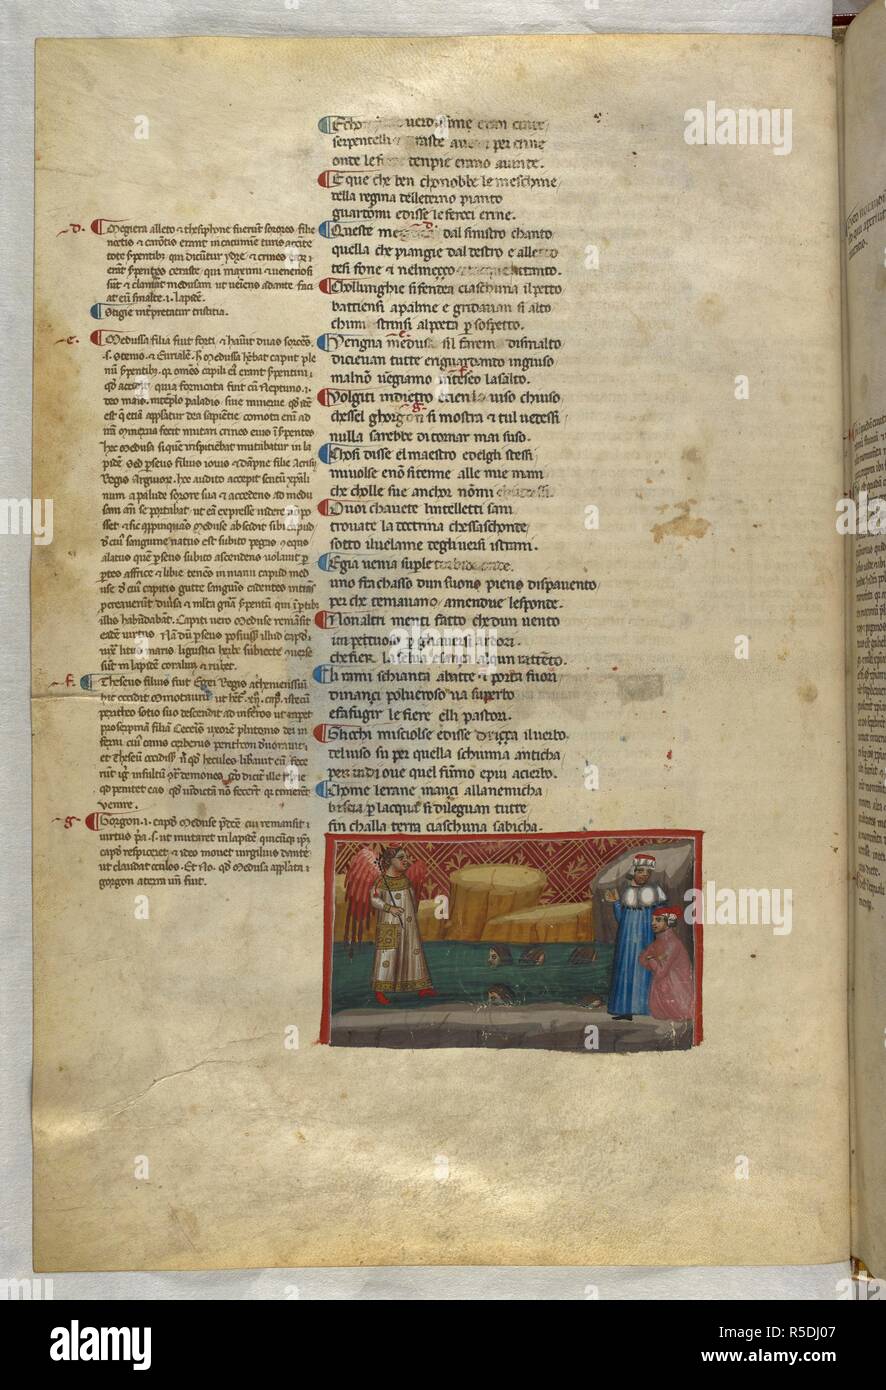 Inferno: The heavenly messenger walks across the Styx. Dante Alighieri, Divina Commedia ( The Divine Comedy ), with a commentary in Latin. 1st half of the 14th century. Source: Egerton 943, f.17v. Language: Italian, Latin. Stock Photo